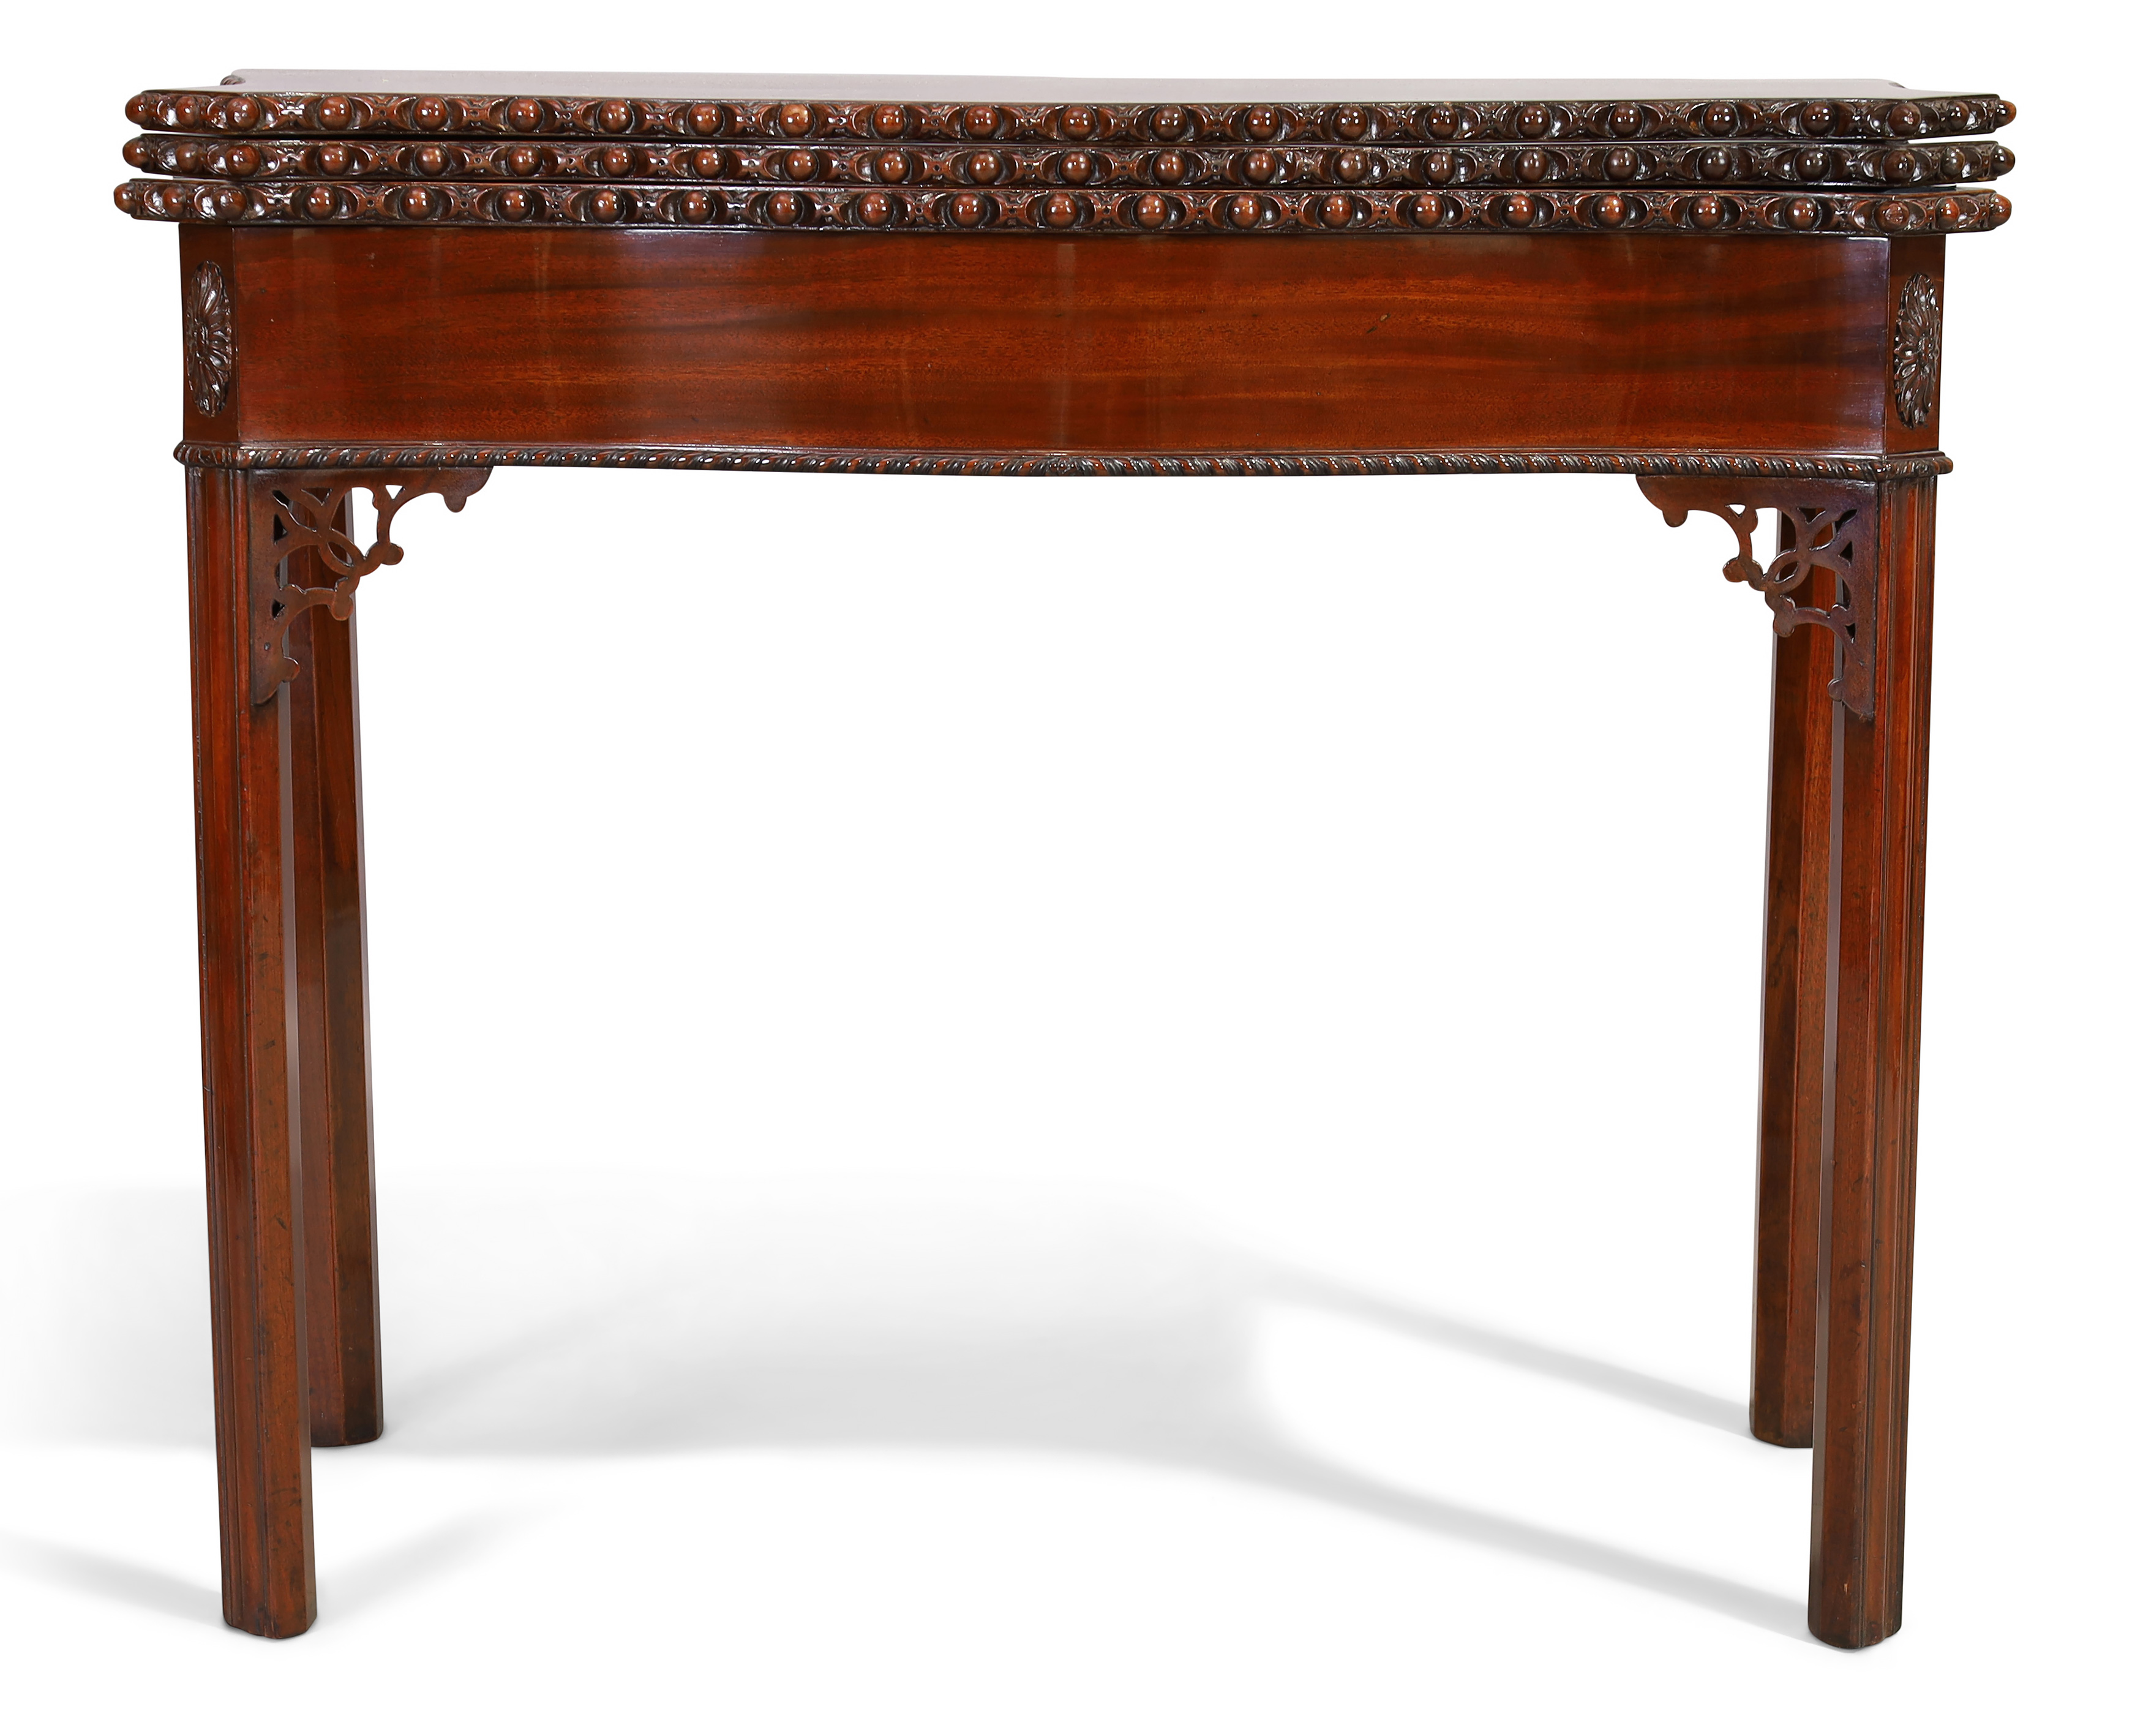 A George II mahogany serpentine front triple fold tea/card table, in the manner of Thomas Chippen... - Image 2 of 6